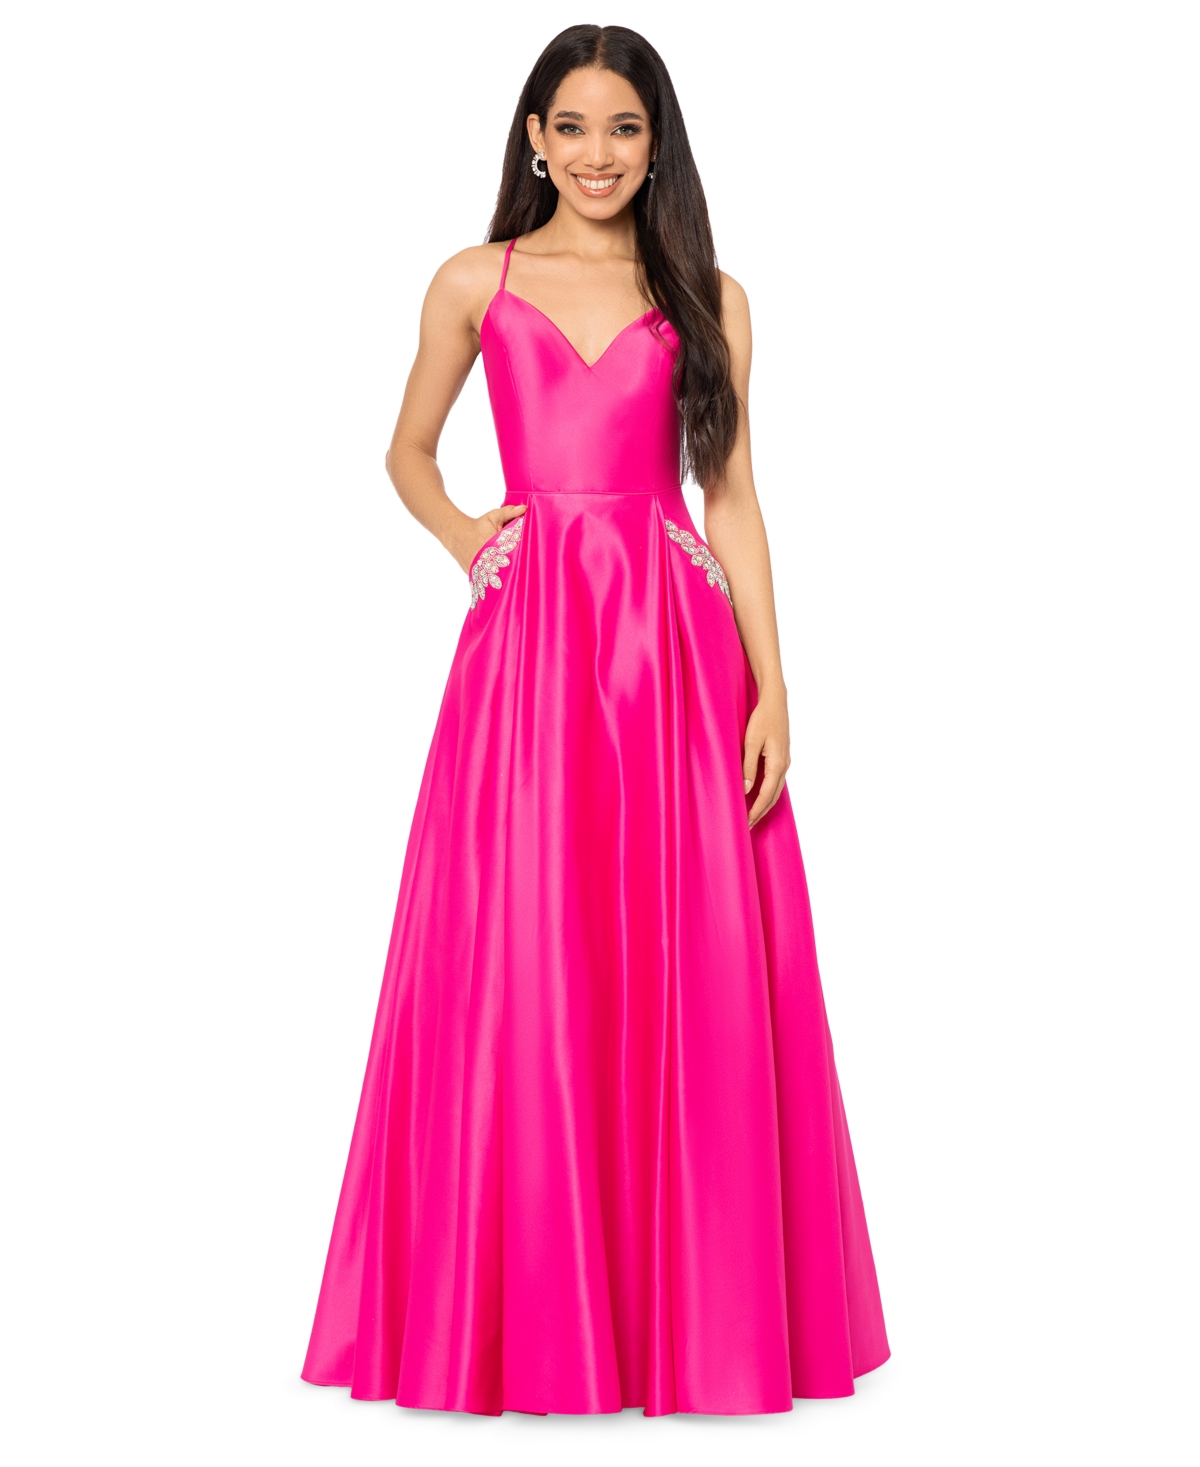 Blondie Nites Juniors' Embellished Lace-Up-Back Gown